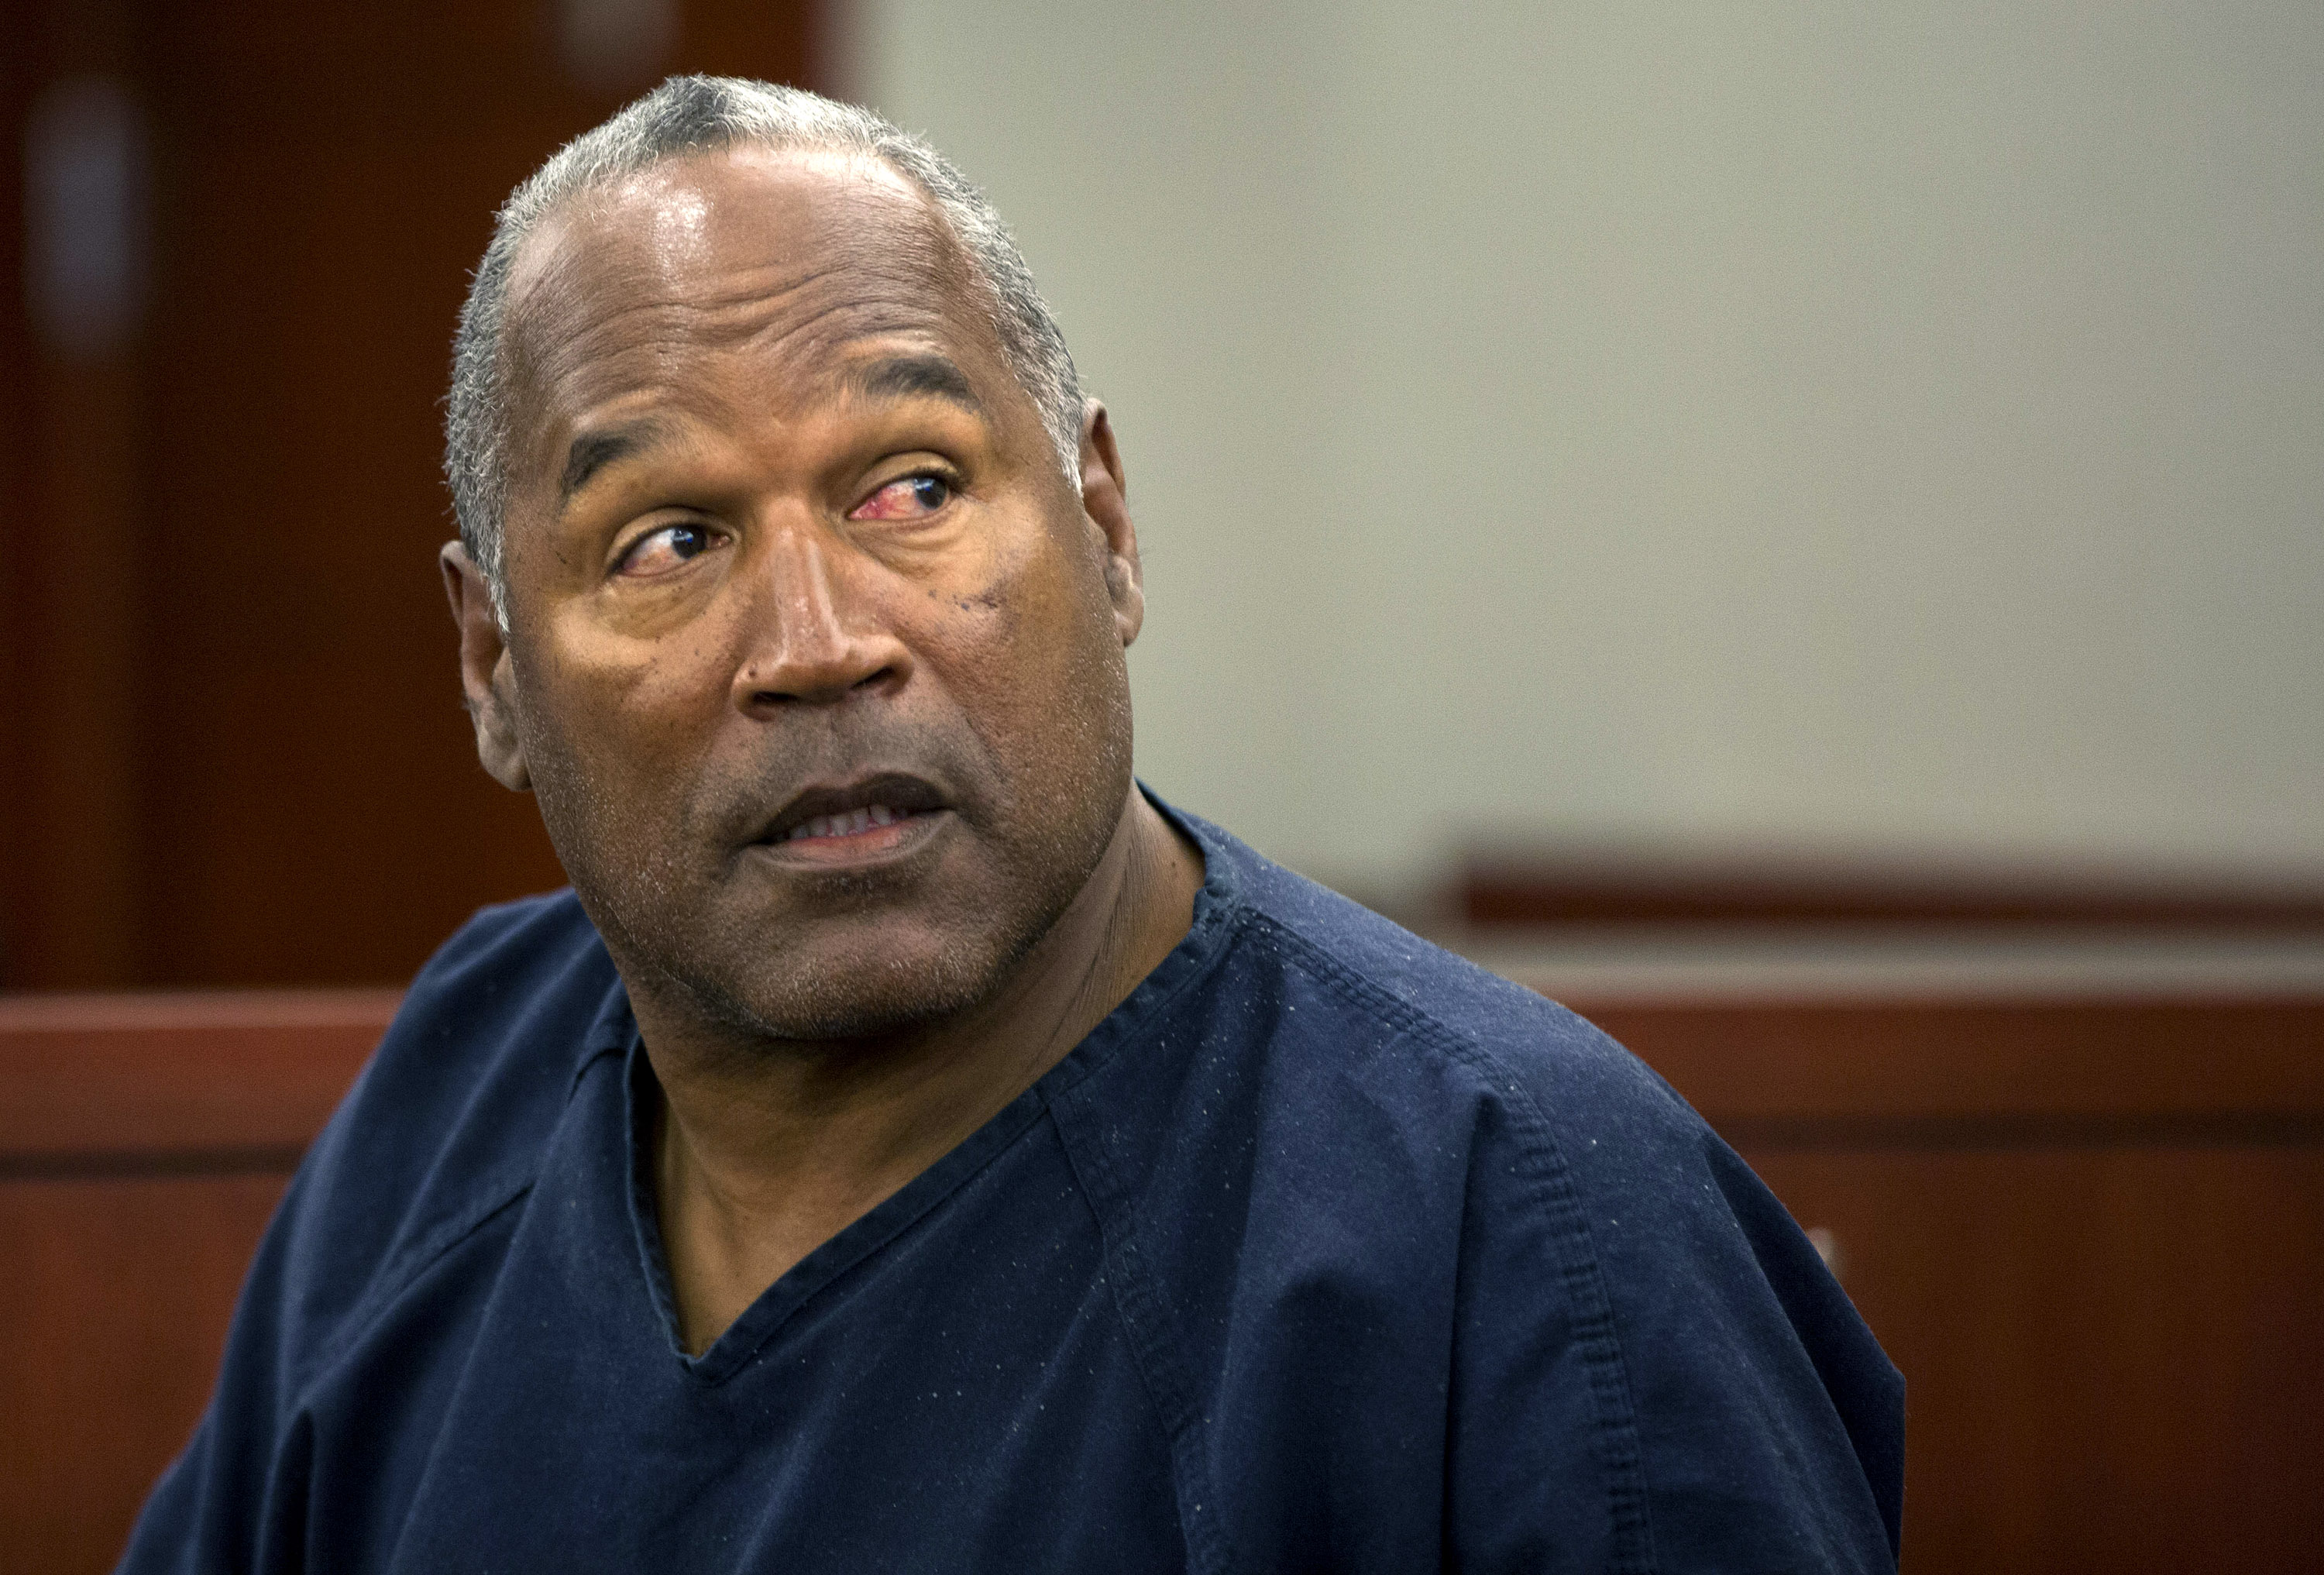 O.J. Simpson at his evidentiary hearing in Clark County District Court on May 13, 2013, in Las Vegas, Nevada. | Source: Getty Images